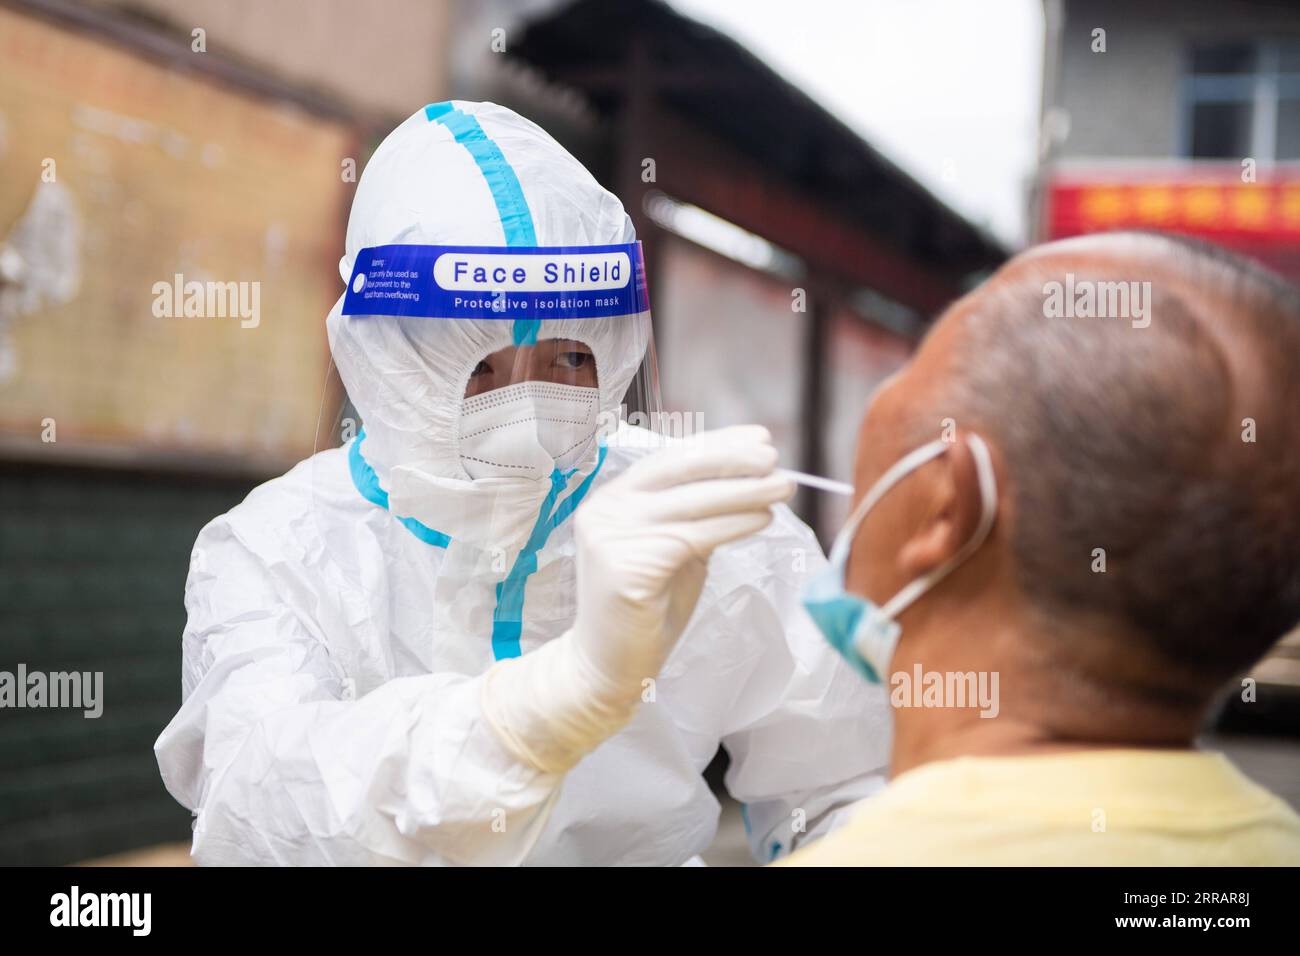 210814 -- ZHANGJIAJIE, Aug. 14, 2021 -- Luo Jinwu takes a throat swab sample from a resident for nucleic acid testing in Yangping Village of Yongding District in Zhangjiajie City, central China s Hunan Province, Aug. 12, 2021. Luo Jinwu and his wife Xiang Ka are medical workers from Zhangjiajie Hospital of Traditional Chinese Medicine. Since the recent resurgence of COVID-19 in Zhangjiajie from July 29, Luo has been conducting nucleic acid tests especially in the countryside, while Xiang has stationed in the hospital to attend to patients. Being apart for about half a month, the couple kept in Stock Photo